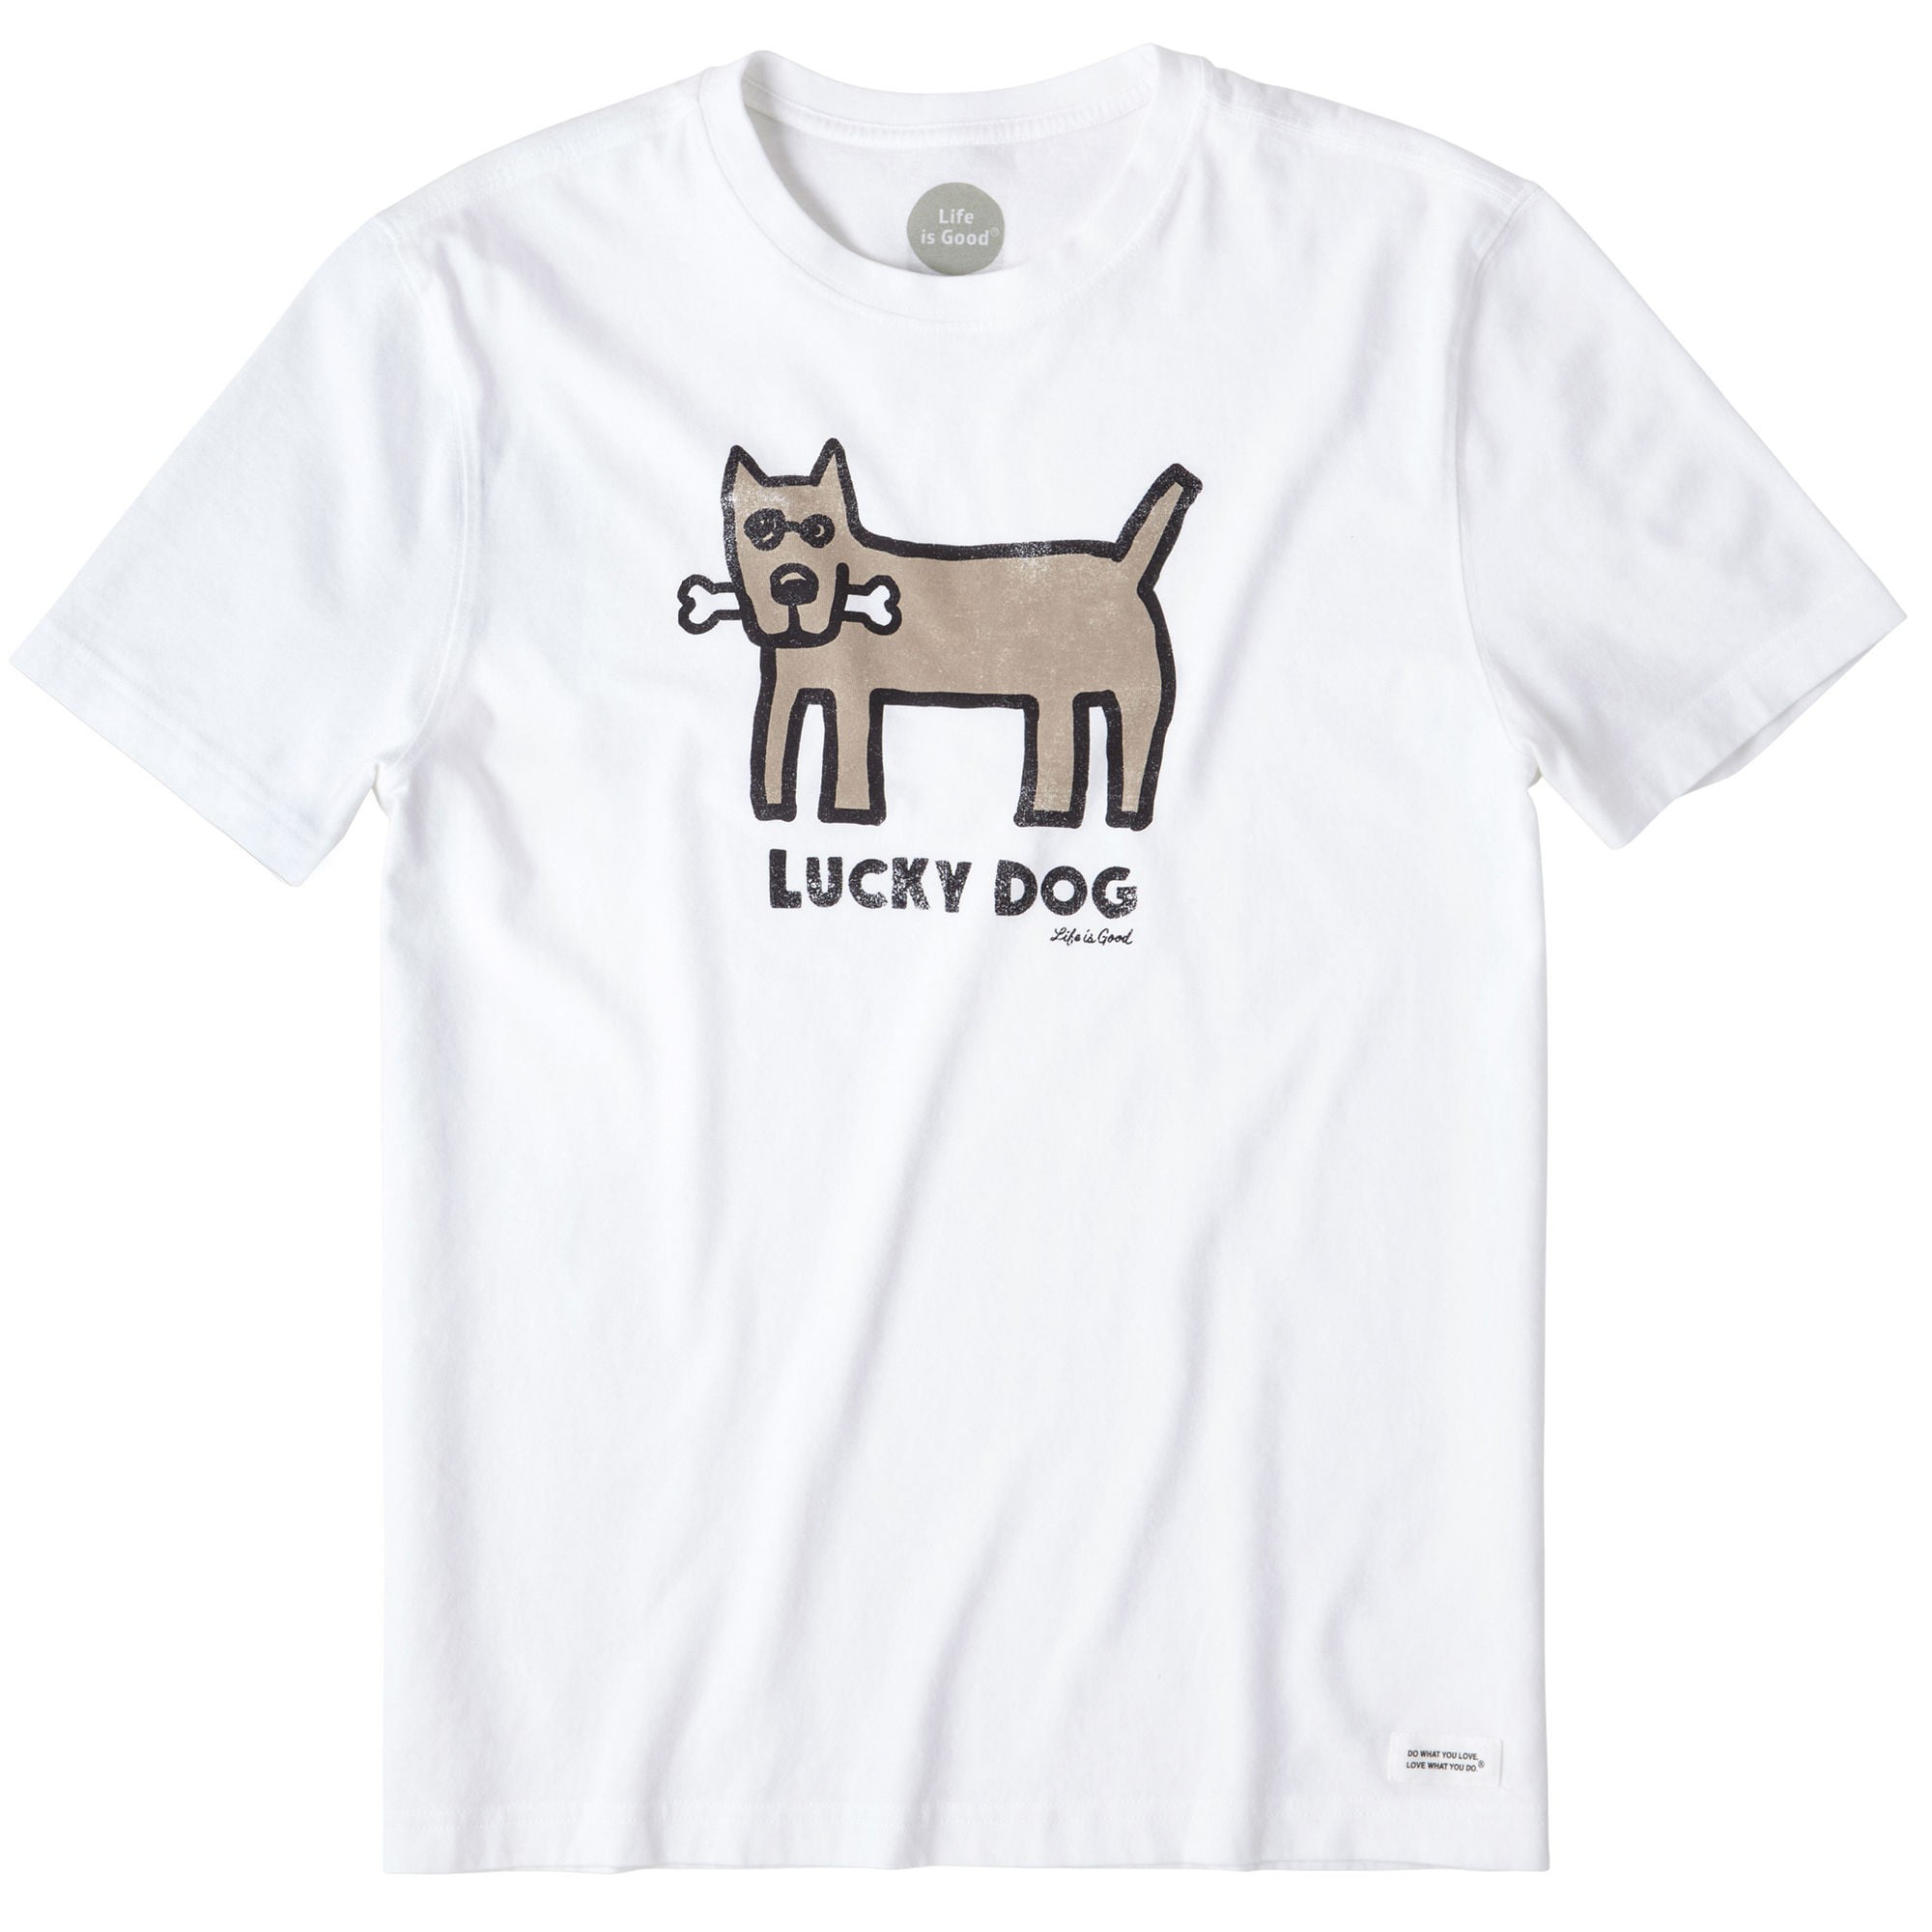 Life is Good Mens Crusher tee Classic Lucky Dog